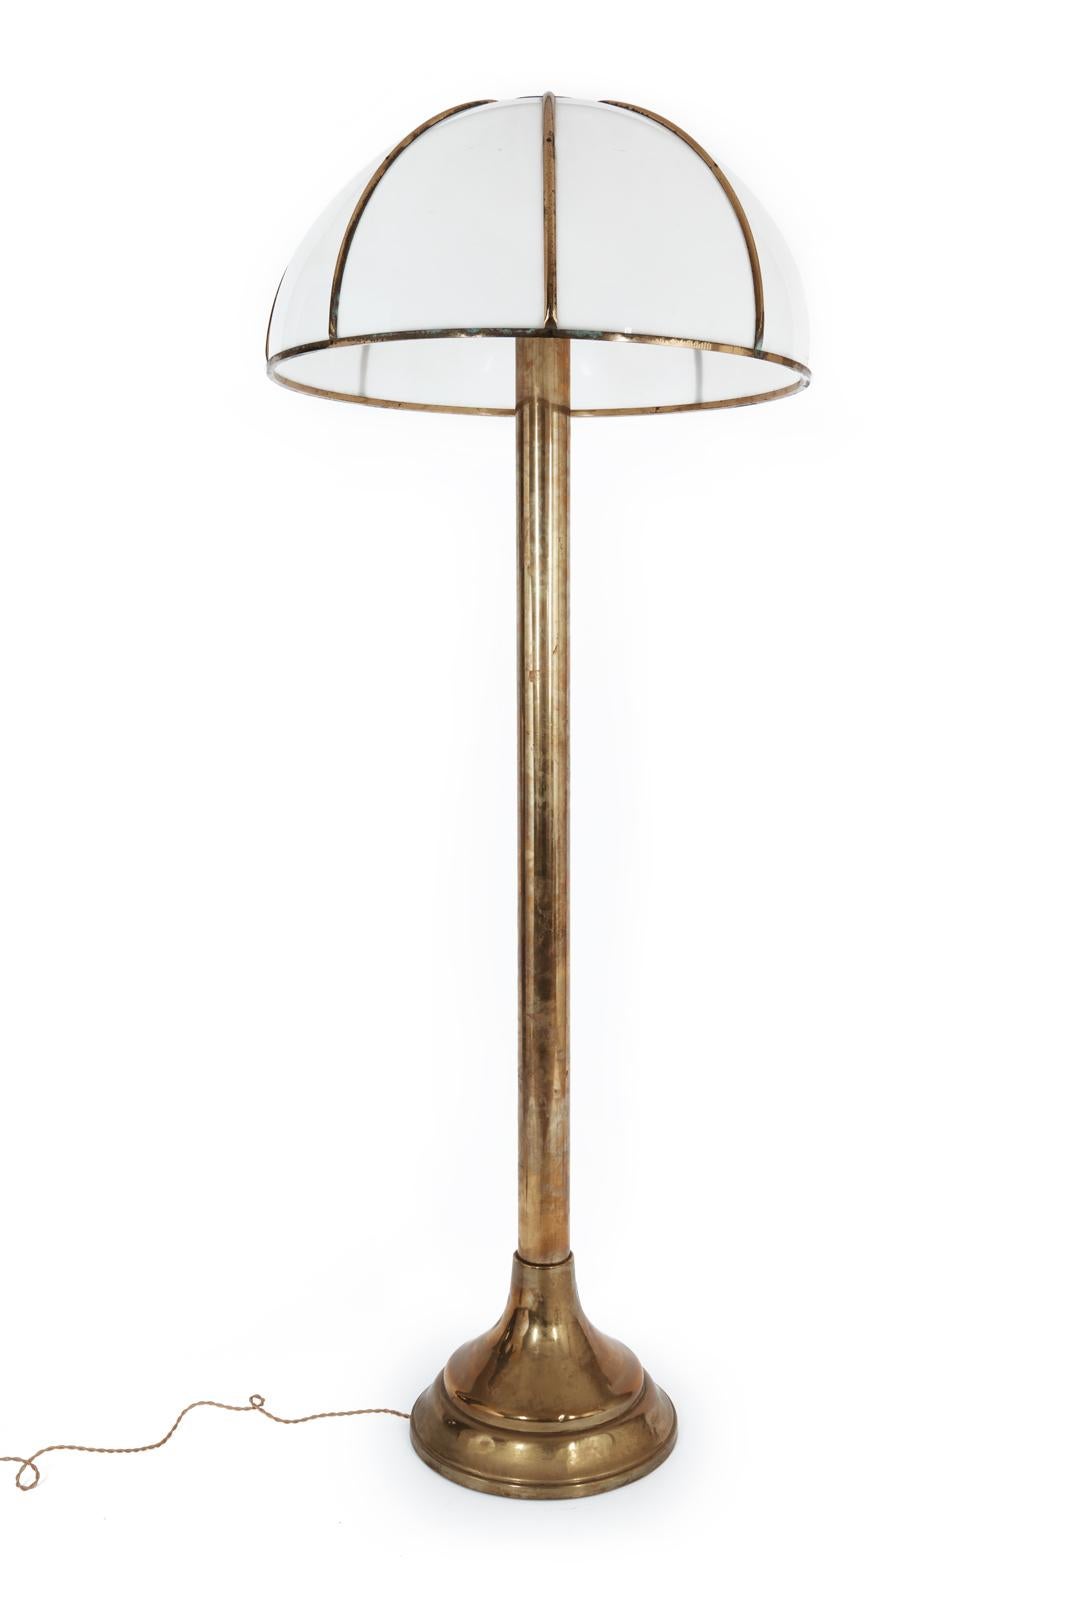 One of the most iconic Gabriella Crespi designs, the Fungo lamp is made in brass and acrylic. This piece is especially rare due to the presence of the artist's signature engraved both on the base and on the lampshade. This piece is sold with a